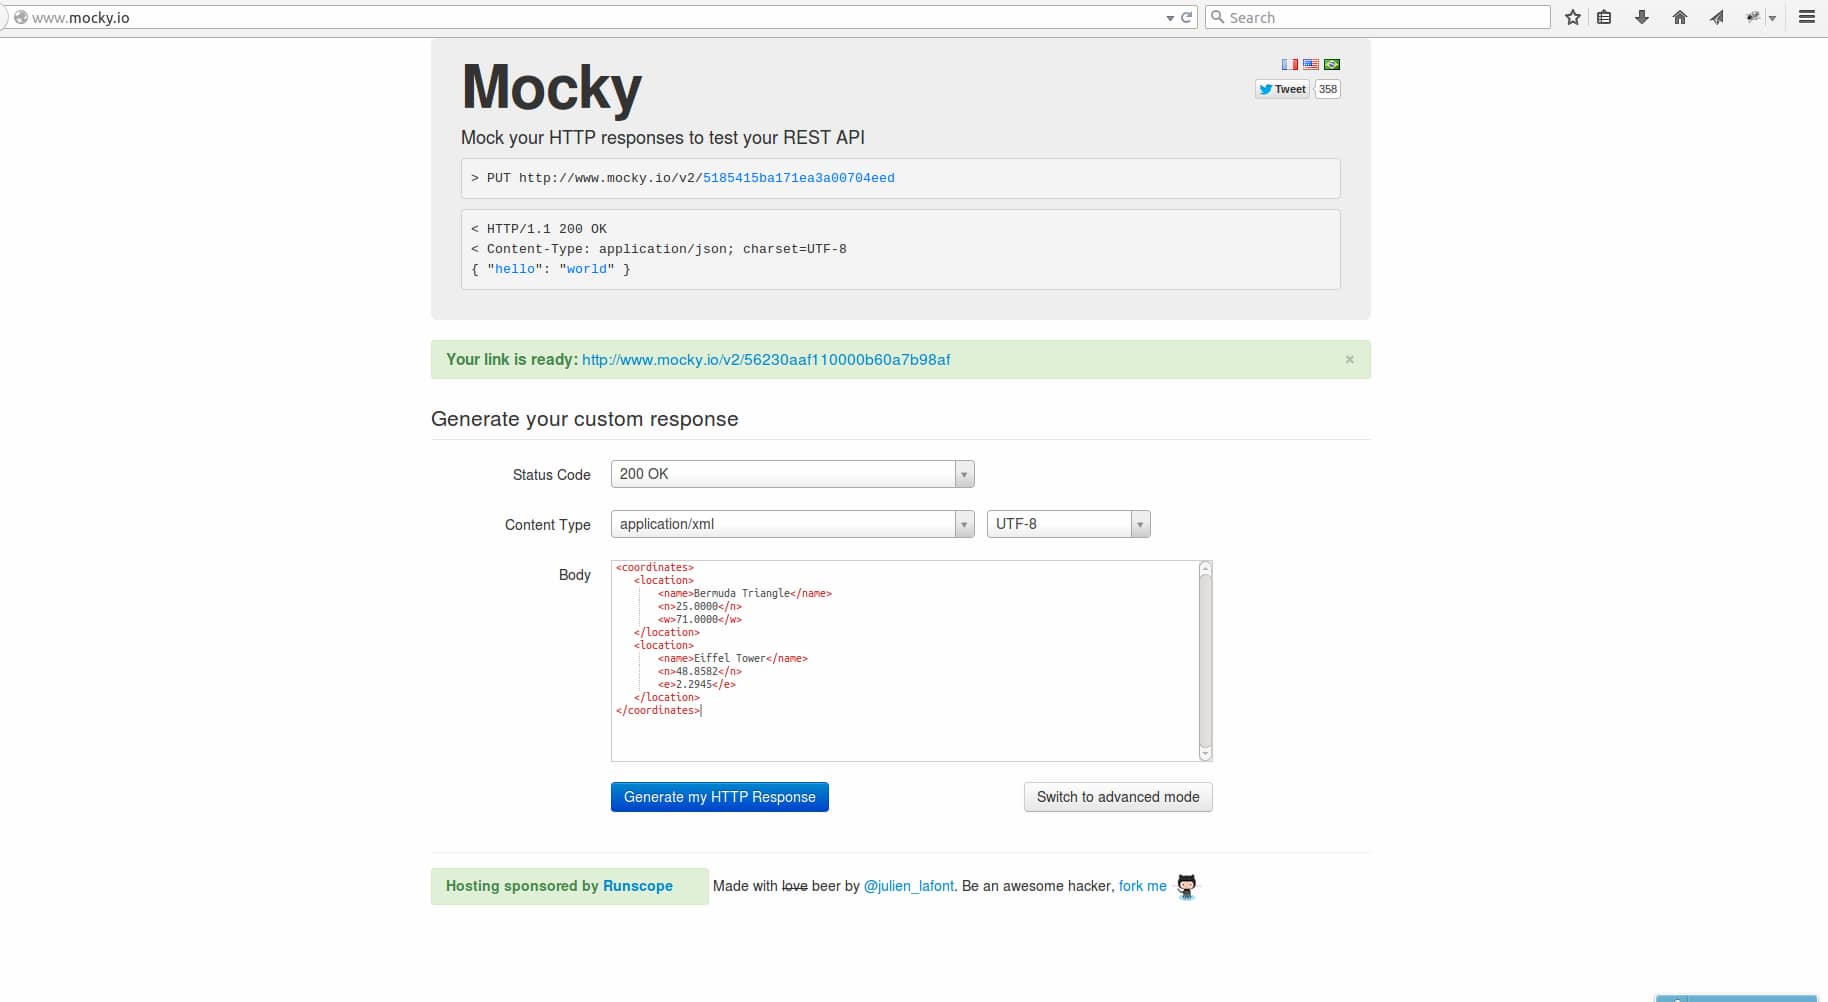 Mocky, a tool for building mock servers